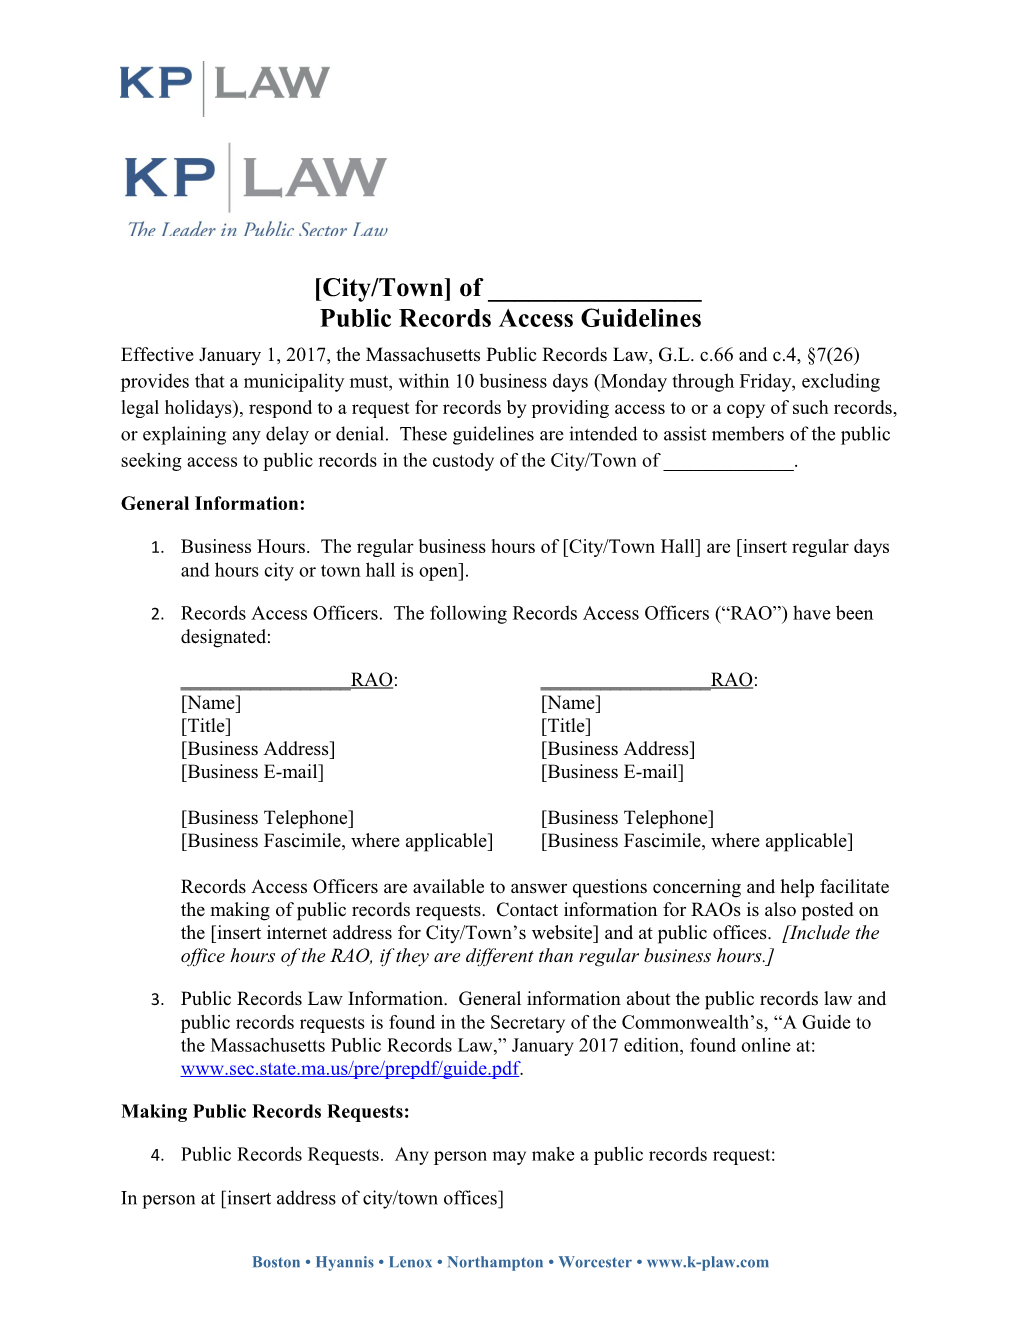 City/Town of ______ Public Records Access Guidelines